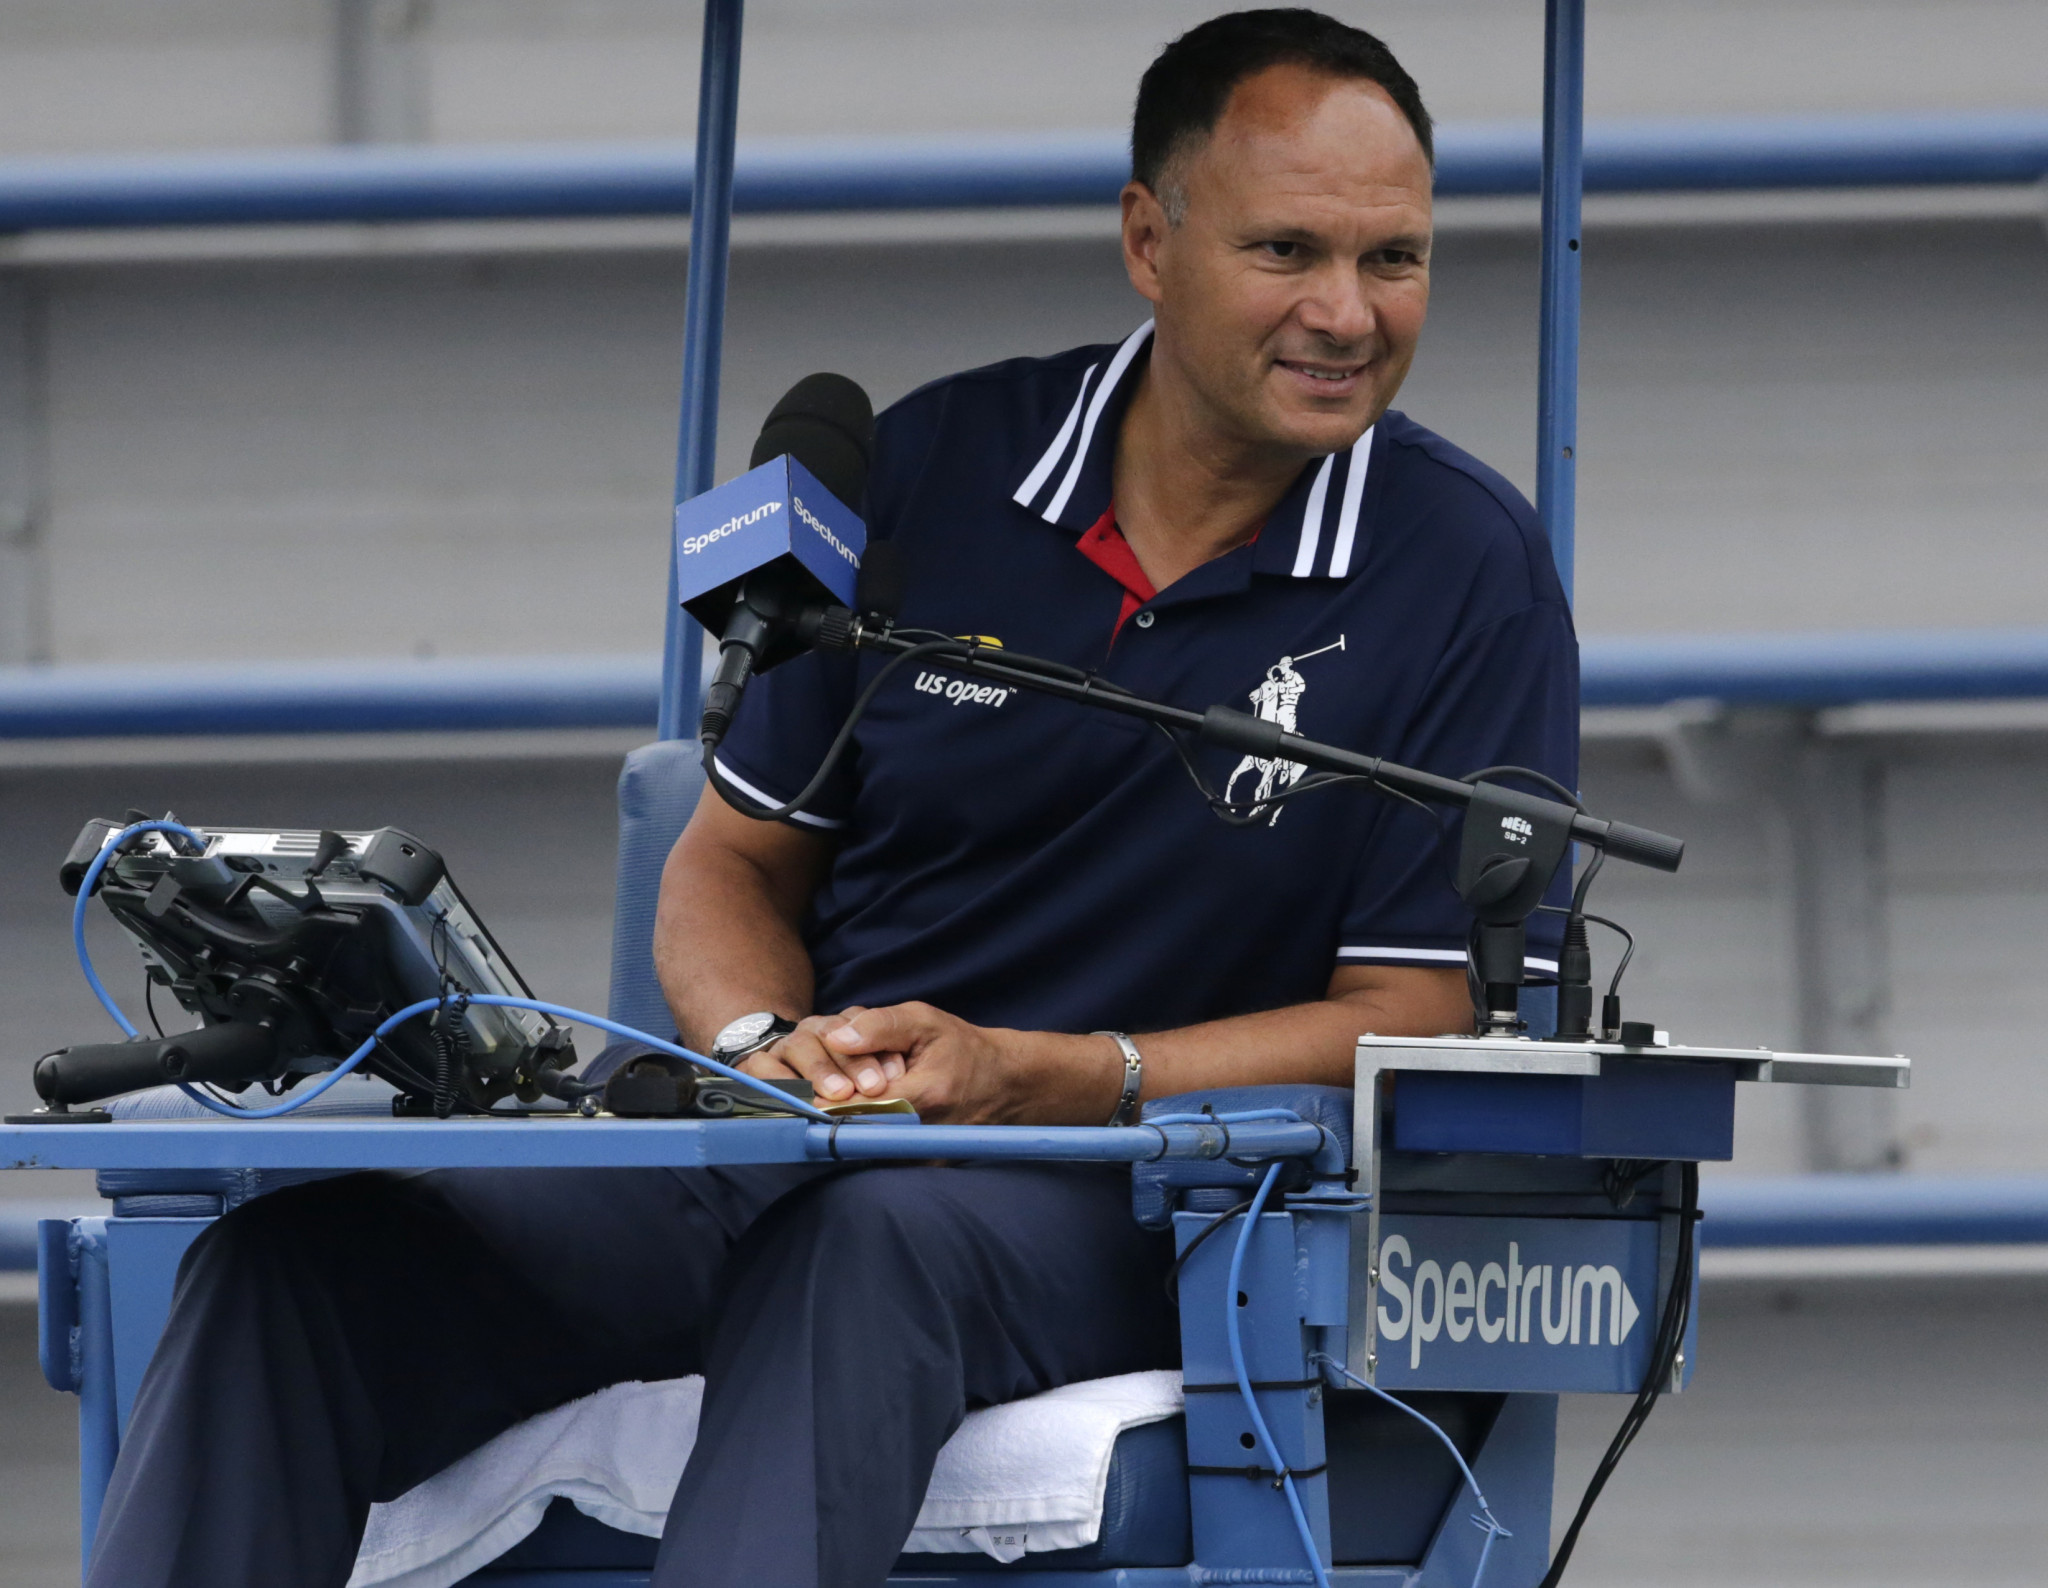 Umpire who gave on-court advice to Kyrgios at US Open suspended from two tournaments by ATP